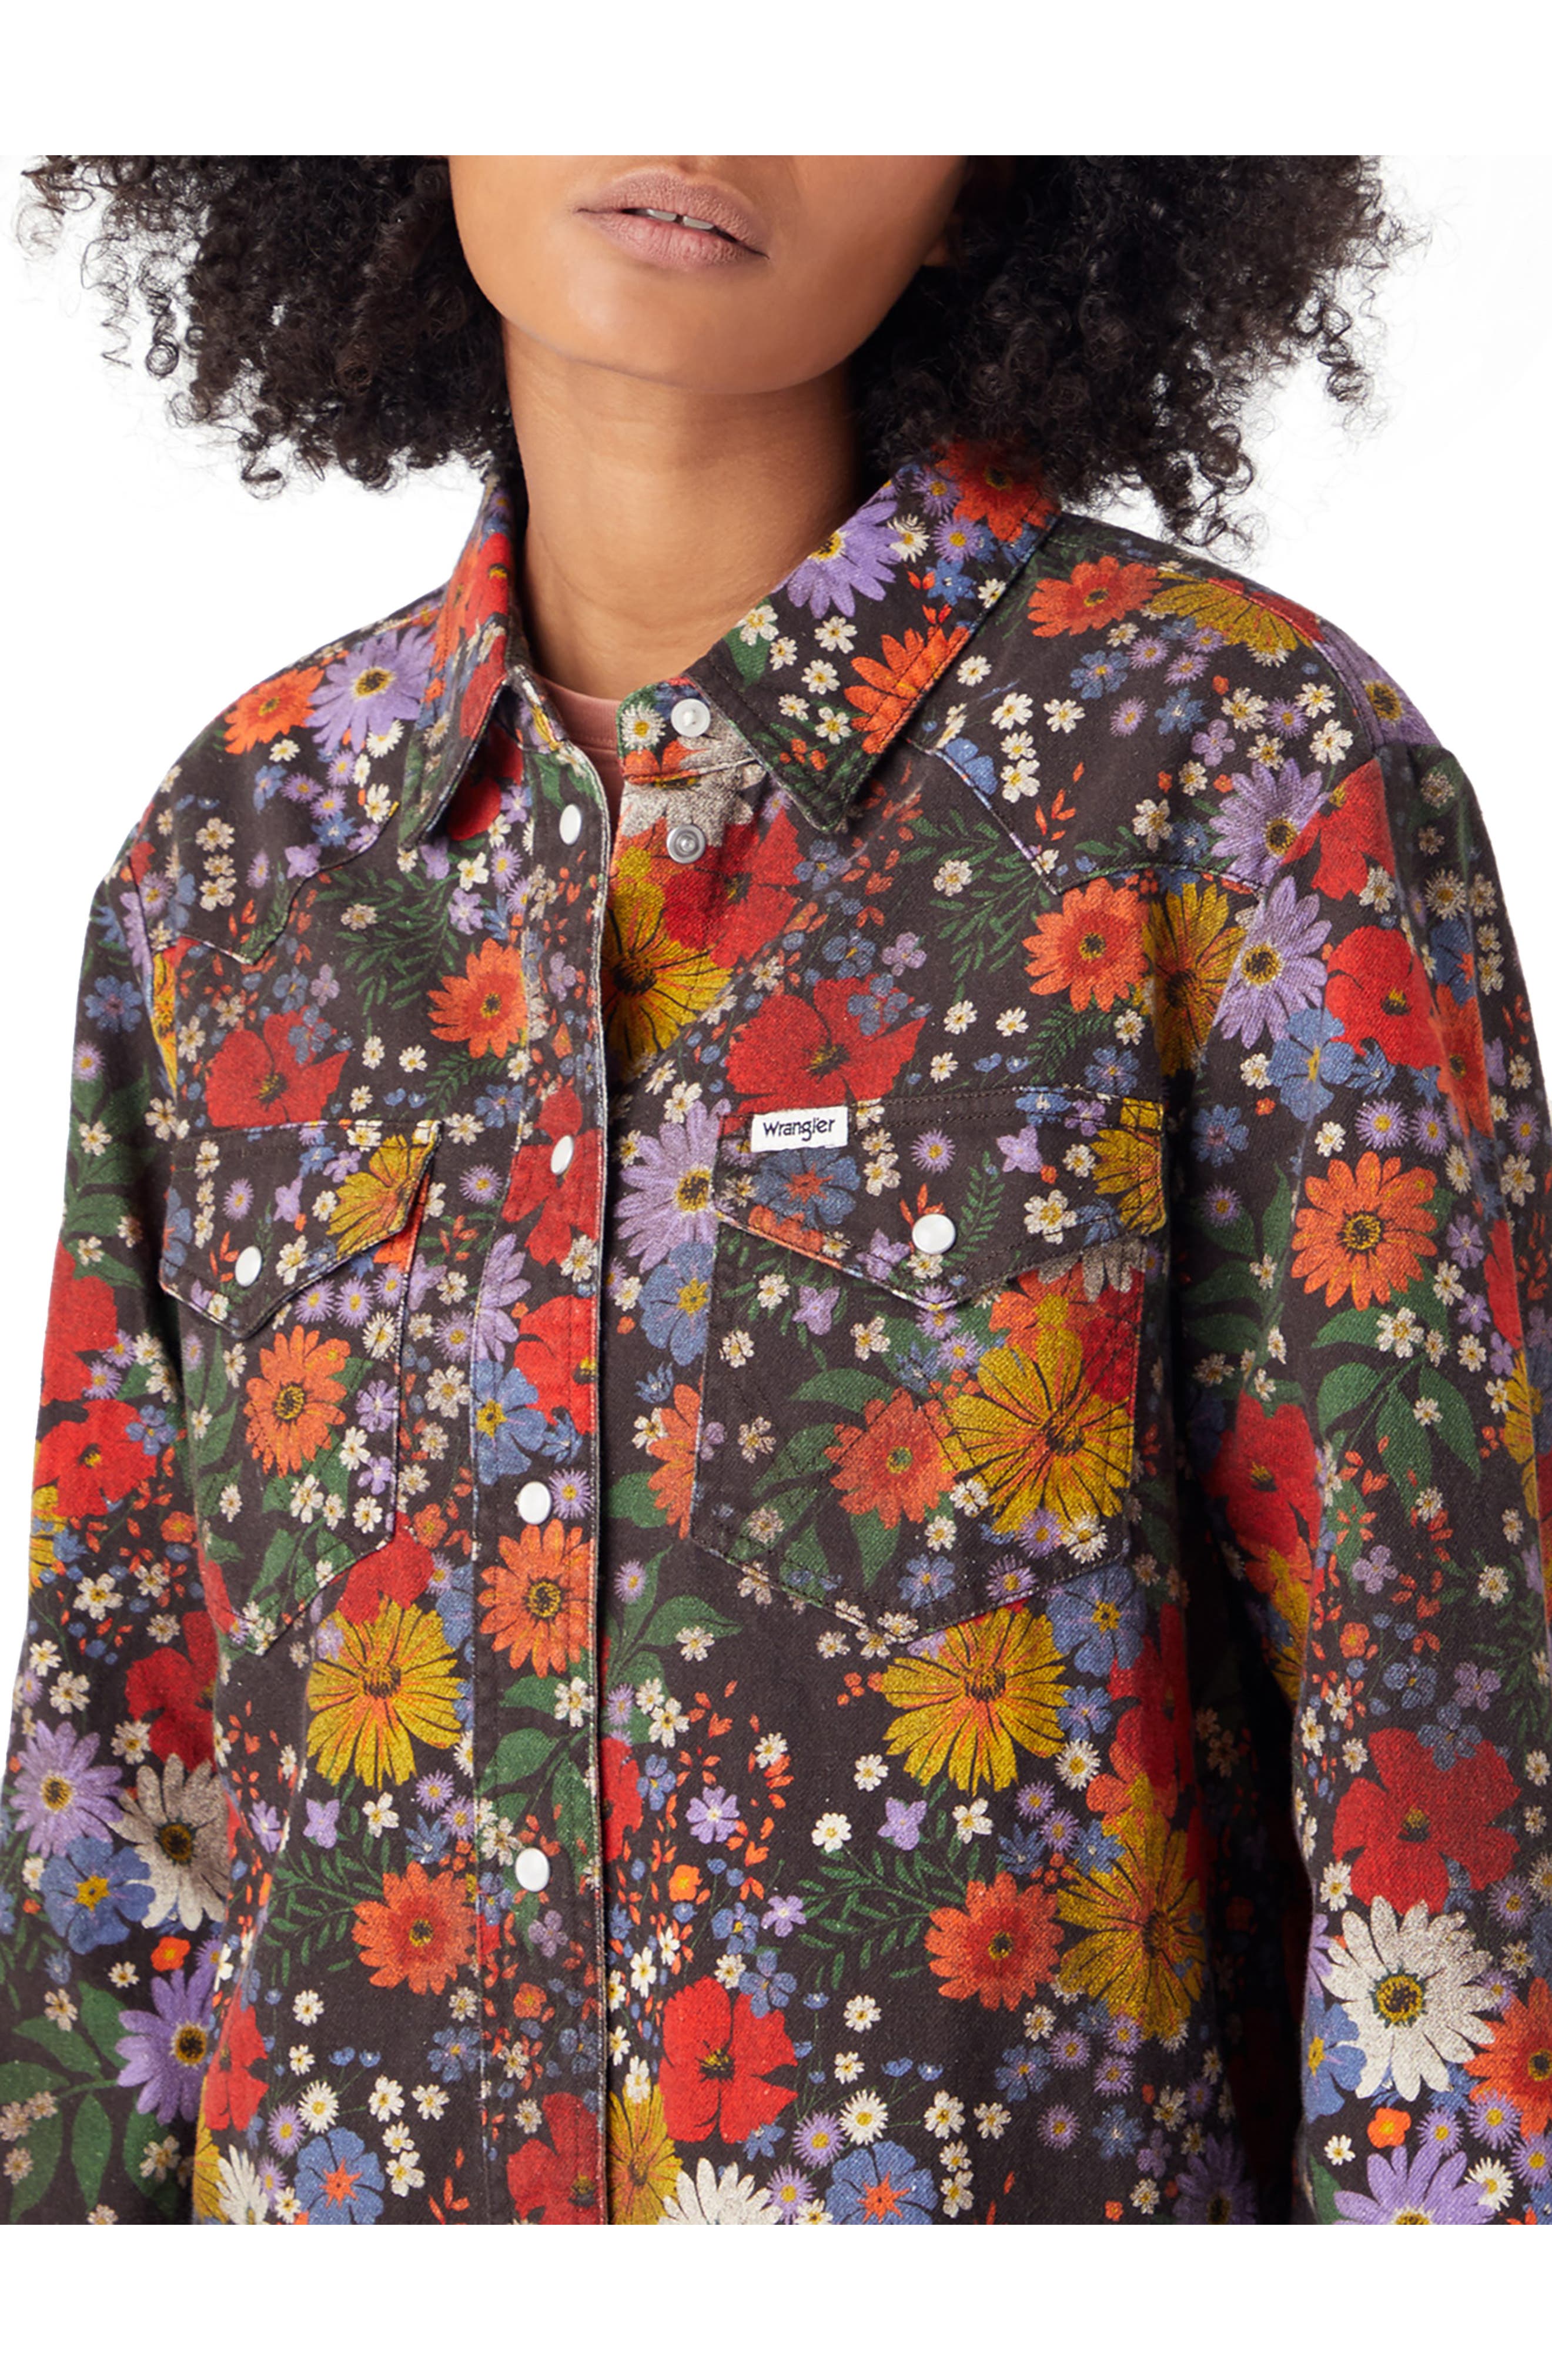 Wrangler® Heritage Floral Shirt - Women's Shirts/Blouses in Floral